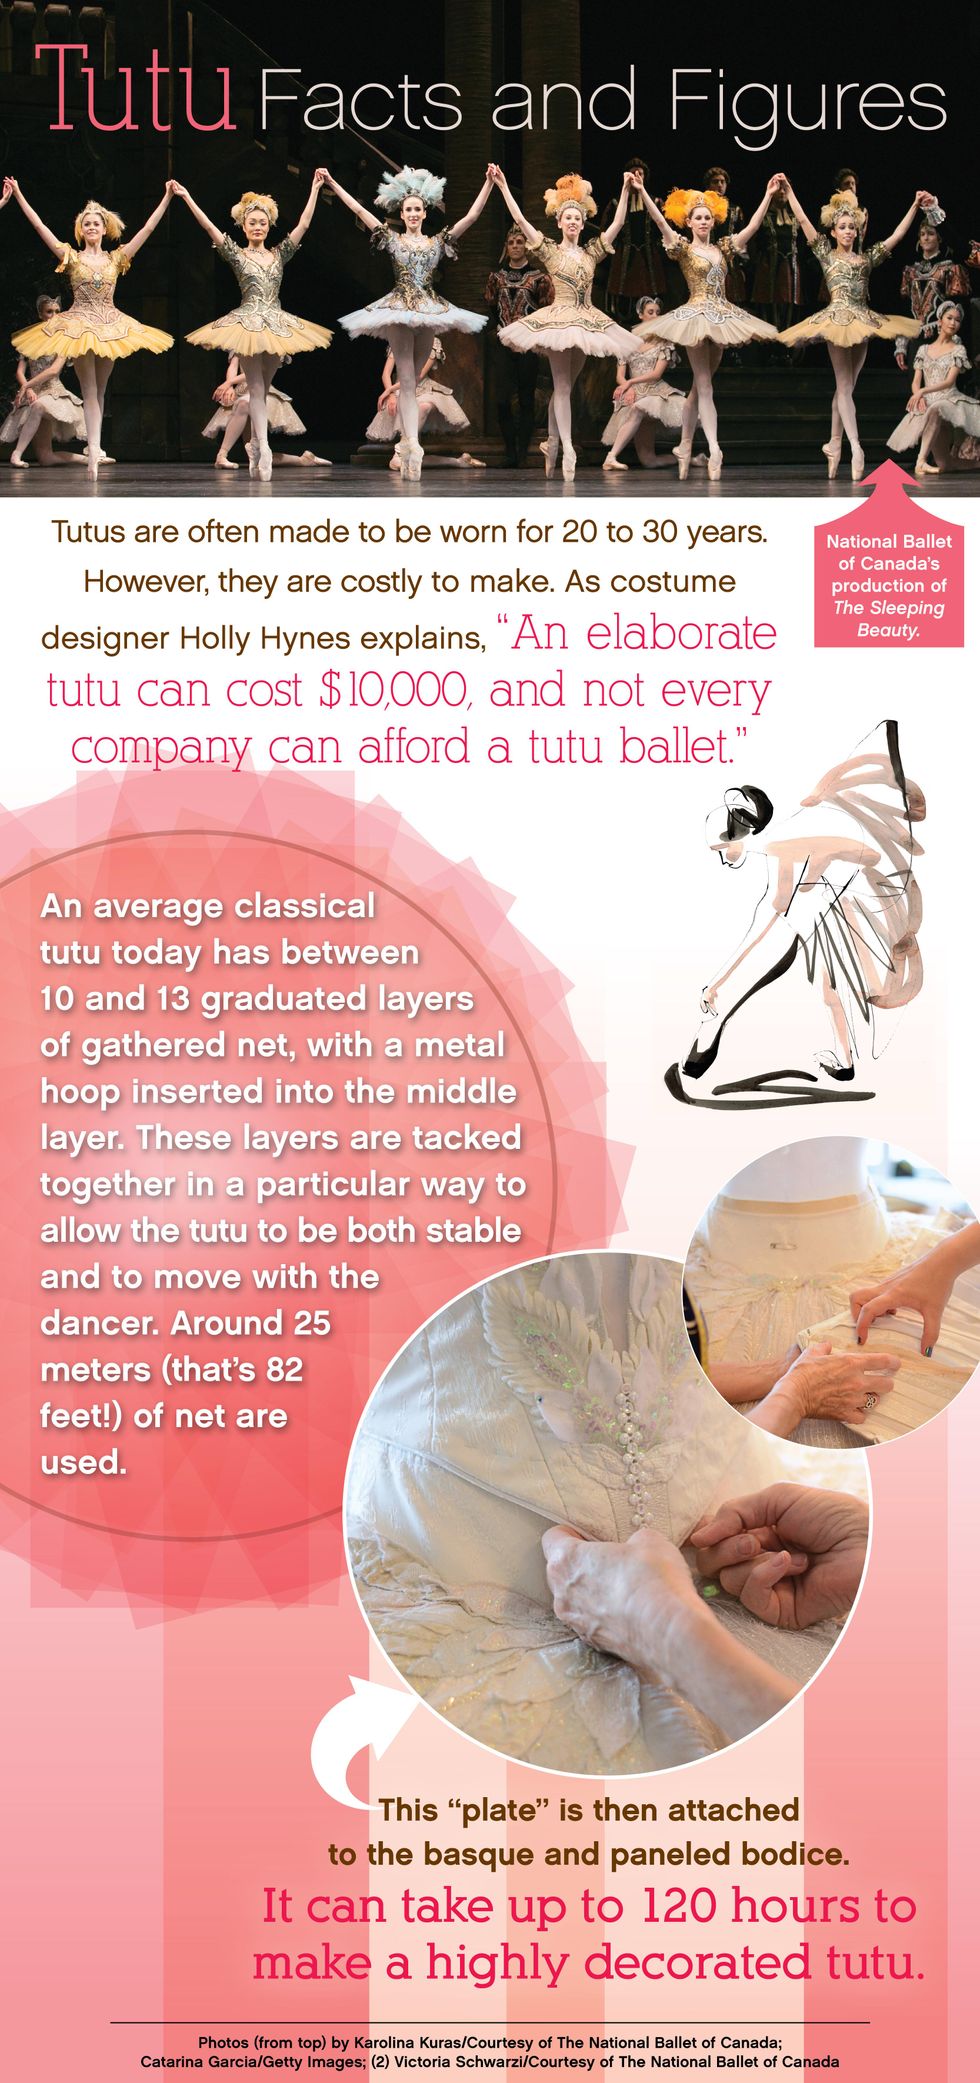 Tutu Facts and Figures. An image of six ballerinas from the National Ballet of Canada’s production f The Sleeping Beauty, wearing tutus. Tutus are often made to be worn for 20 to 30 years. However, they are costly to make. As costume designer Holly Hynes explains, “An elaborate tutu can cost $10,000, and not every company can afford a tutu ballet.” An average classical tutu today has between 10 and 13 graduated layers of gathered net, with a metal hoop inserted into the middle layer. These layers are tacked together in a particular way to allow the tutu to be both stable and to move with the dancer. Around 25 meters (that’s 82 feet!) of net are used. Accompanying an image of a tutu being pinned together, there is text which says: This “plate” is then attached to the basque and panelled bodice. It can take up to 120 hours to make a highly decorated tutu. Photos by Karolina Kuras/Courtesy of the National Ballet of Canada; Catarina Garcia/Getty Images; Victoria Schwawrzi/Courtest of The National Ballet of Canada.